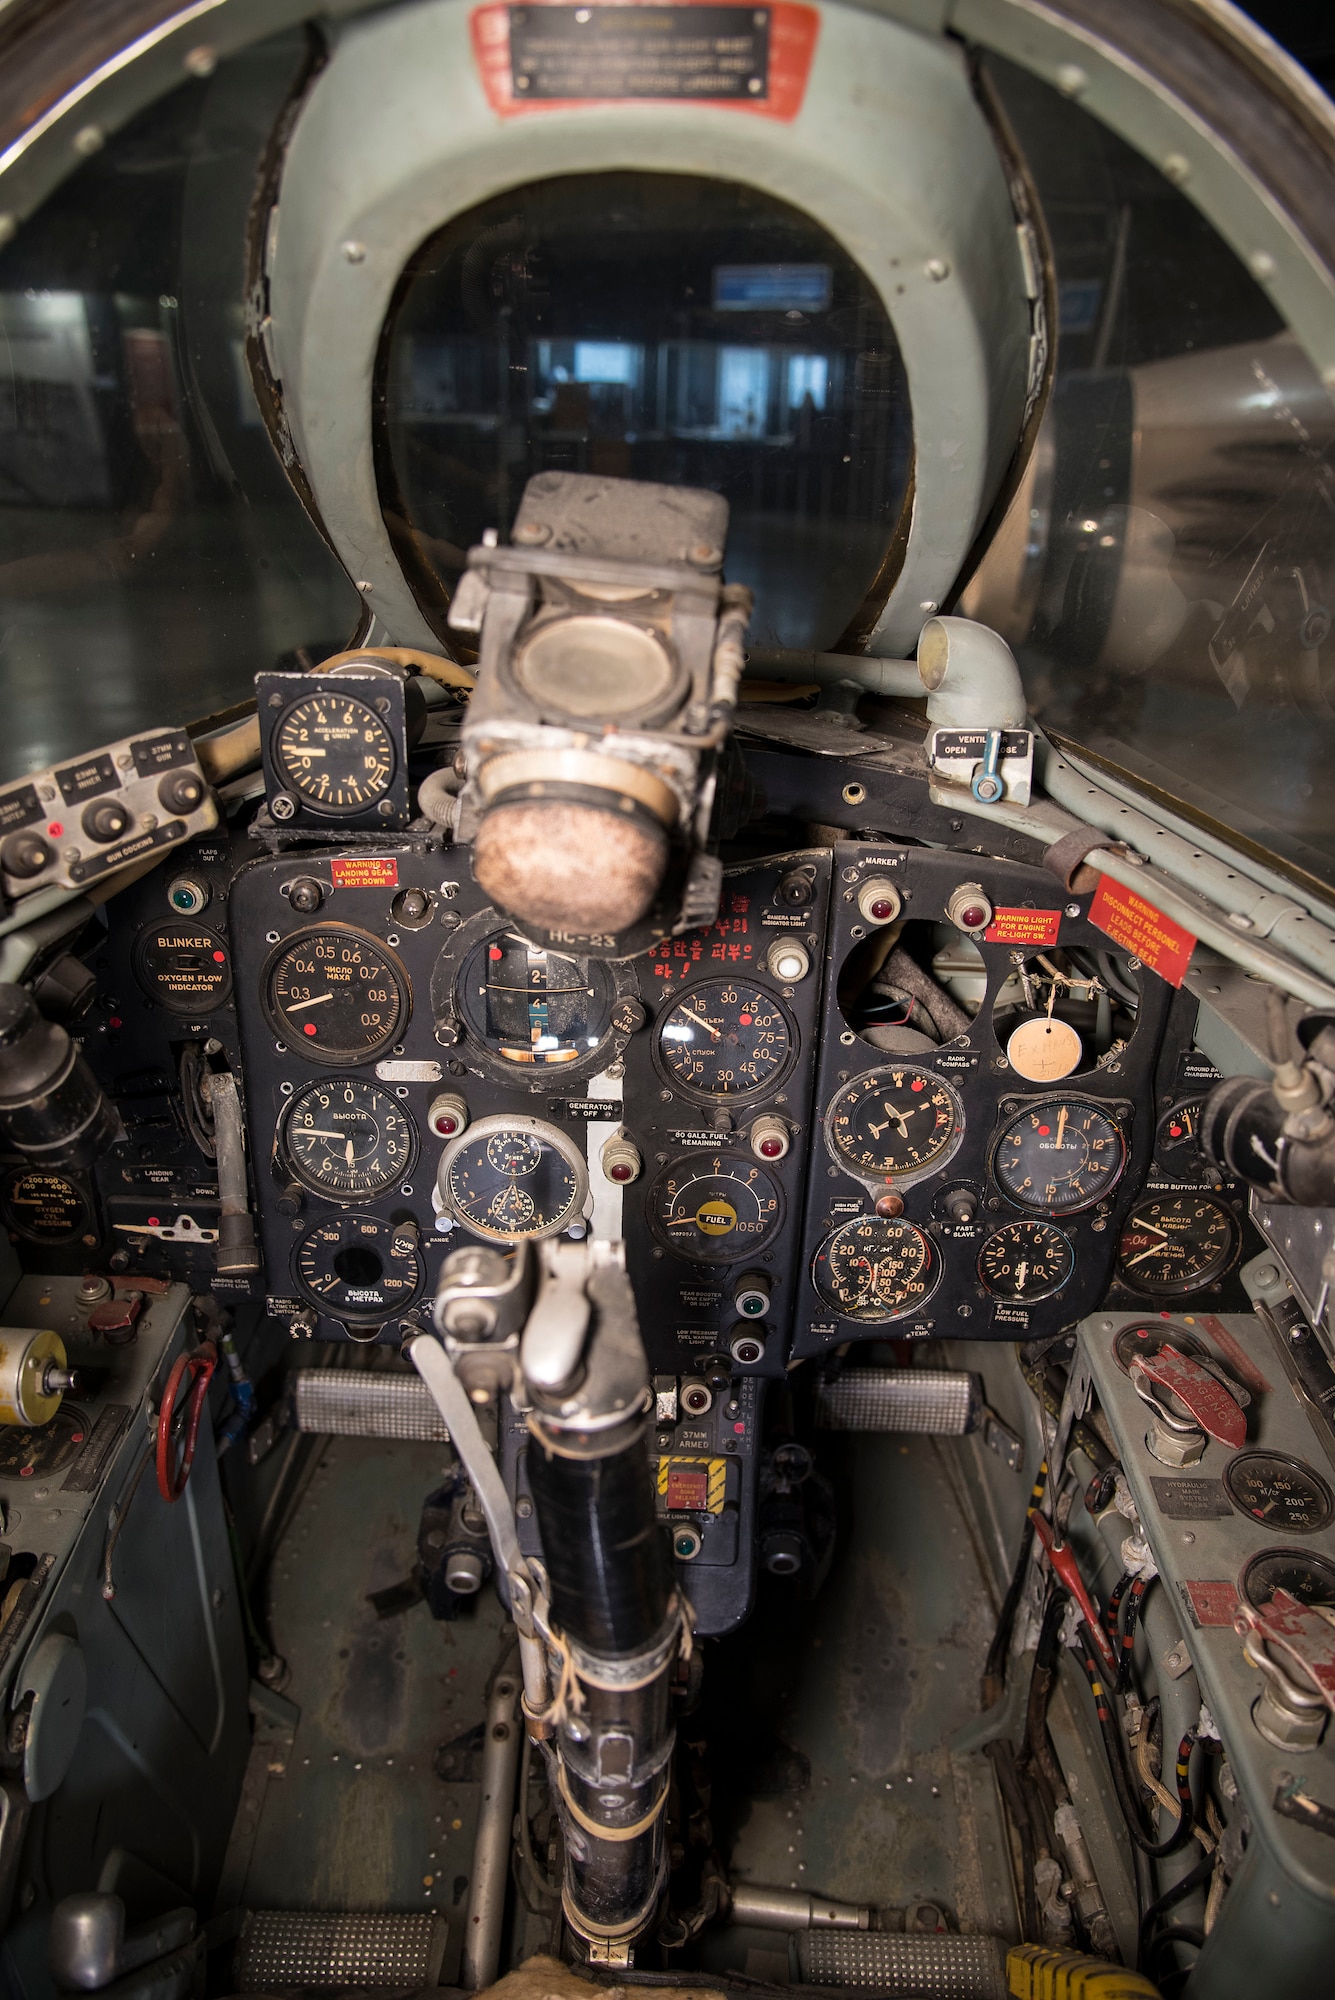 DAYTON, Ohio -- Mikoyan-Gurevich MiG-15 cockpit view in the Korean War Gallery at the National Museum of the United States Air Force. (U.S. Air Force photo by Ken LaRock)